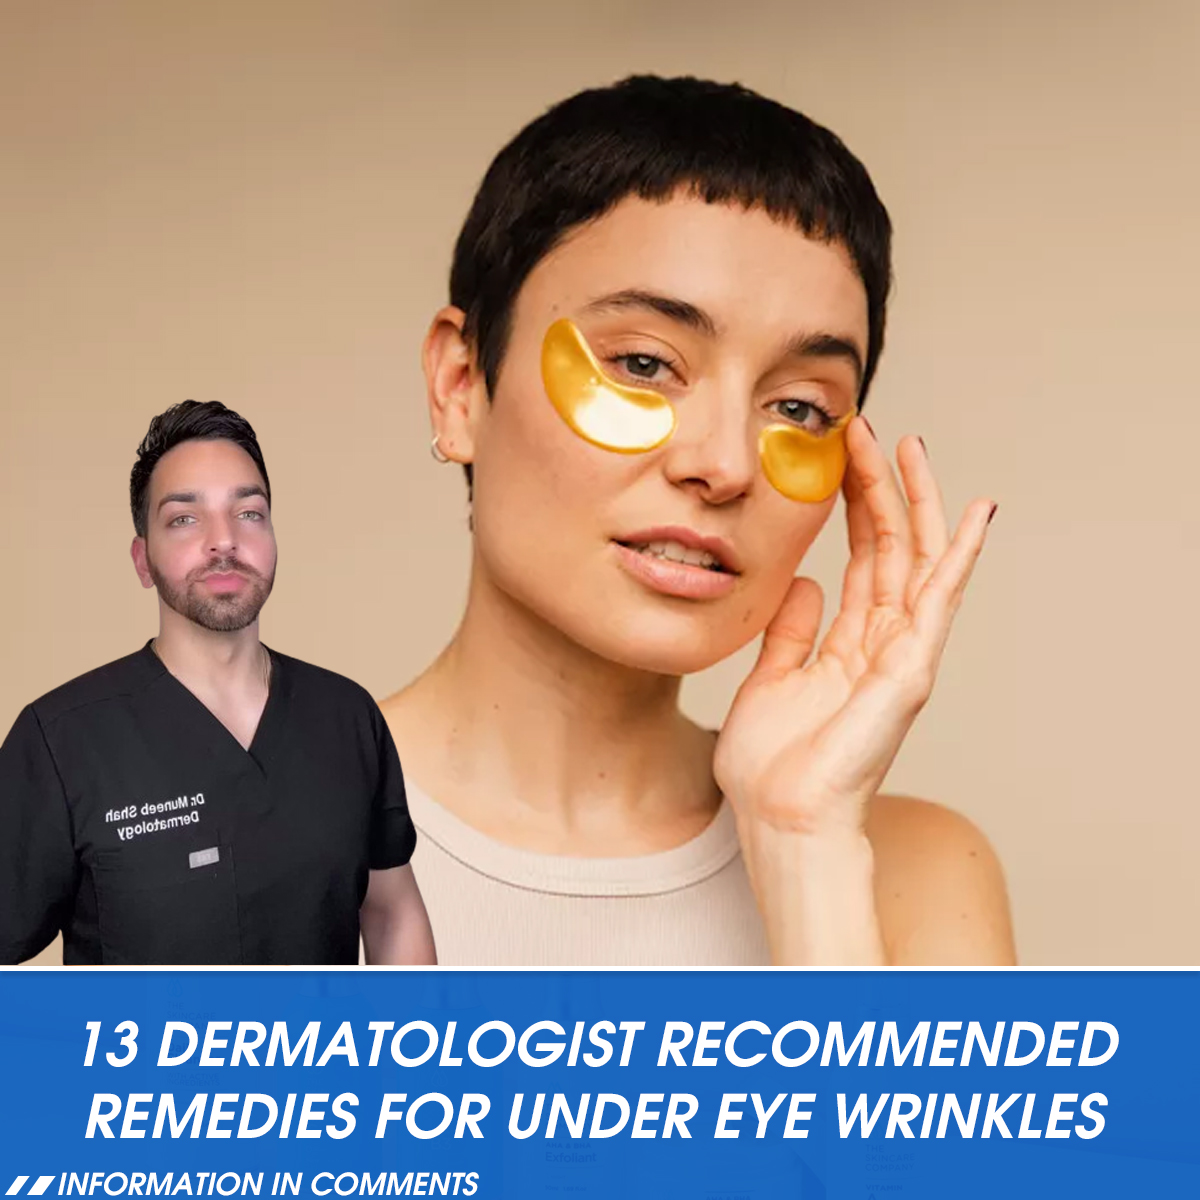 13 Dermatologist Recommended Remedies for Under Eye Wrinkles